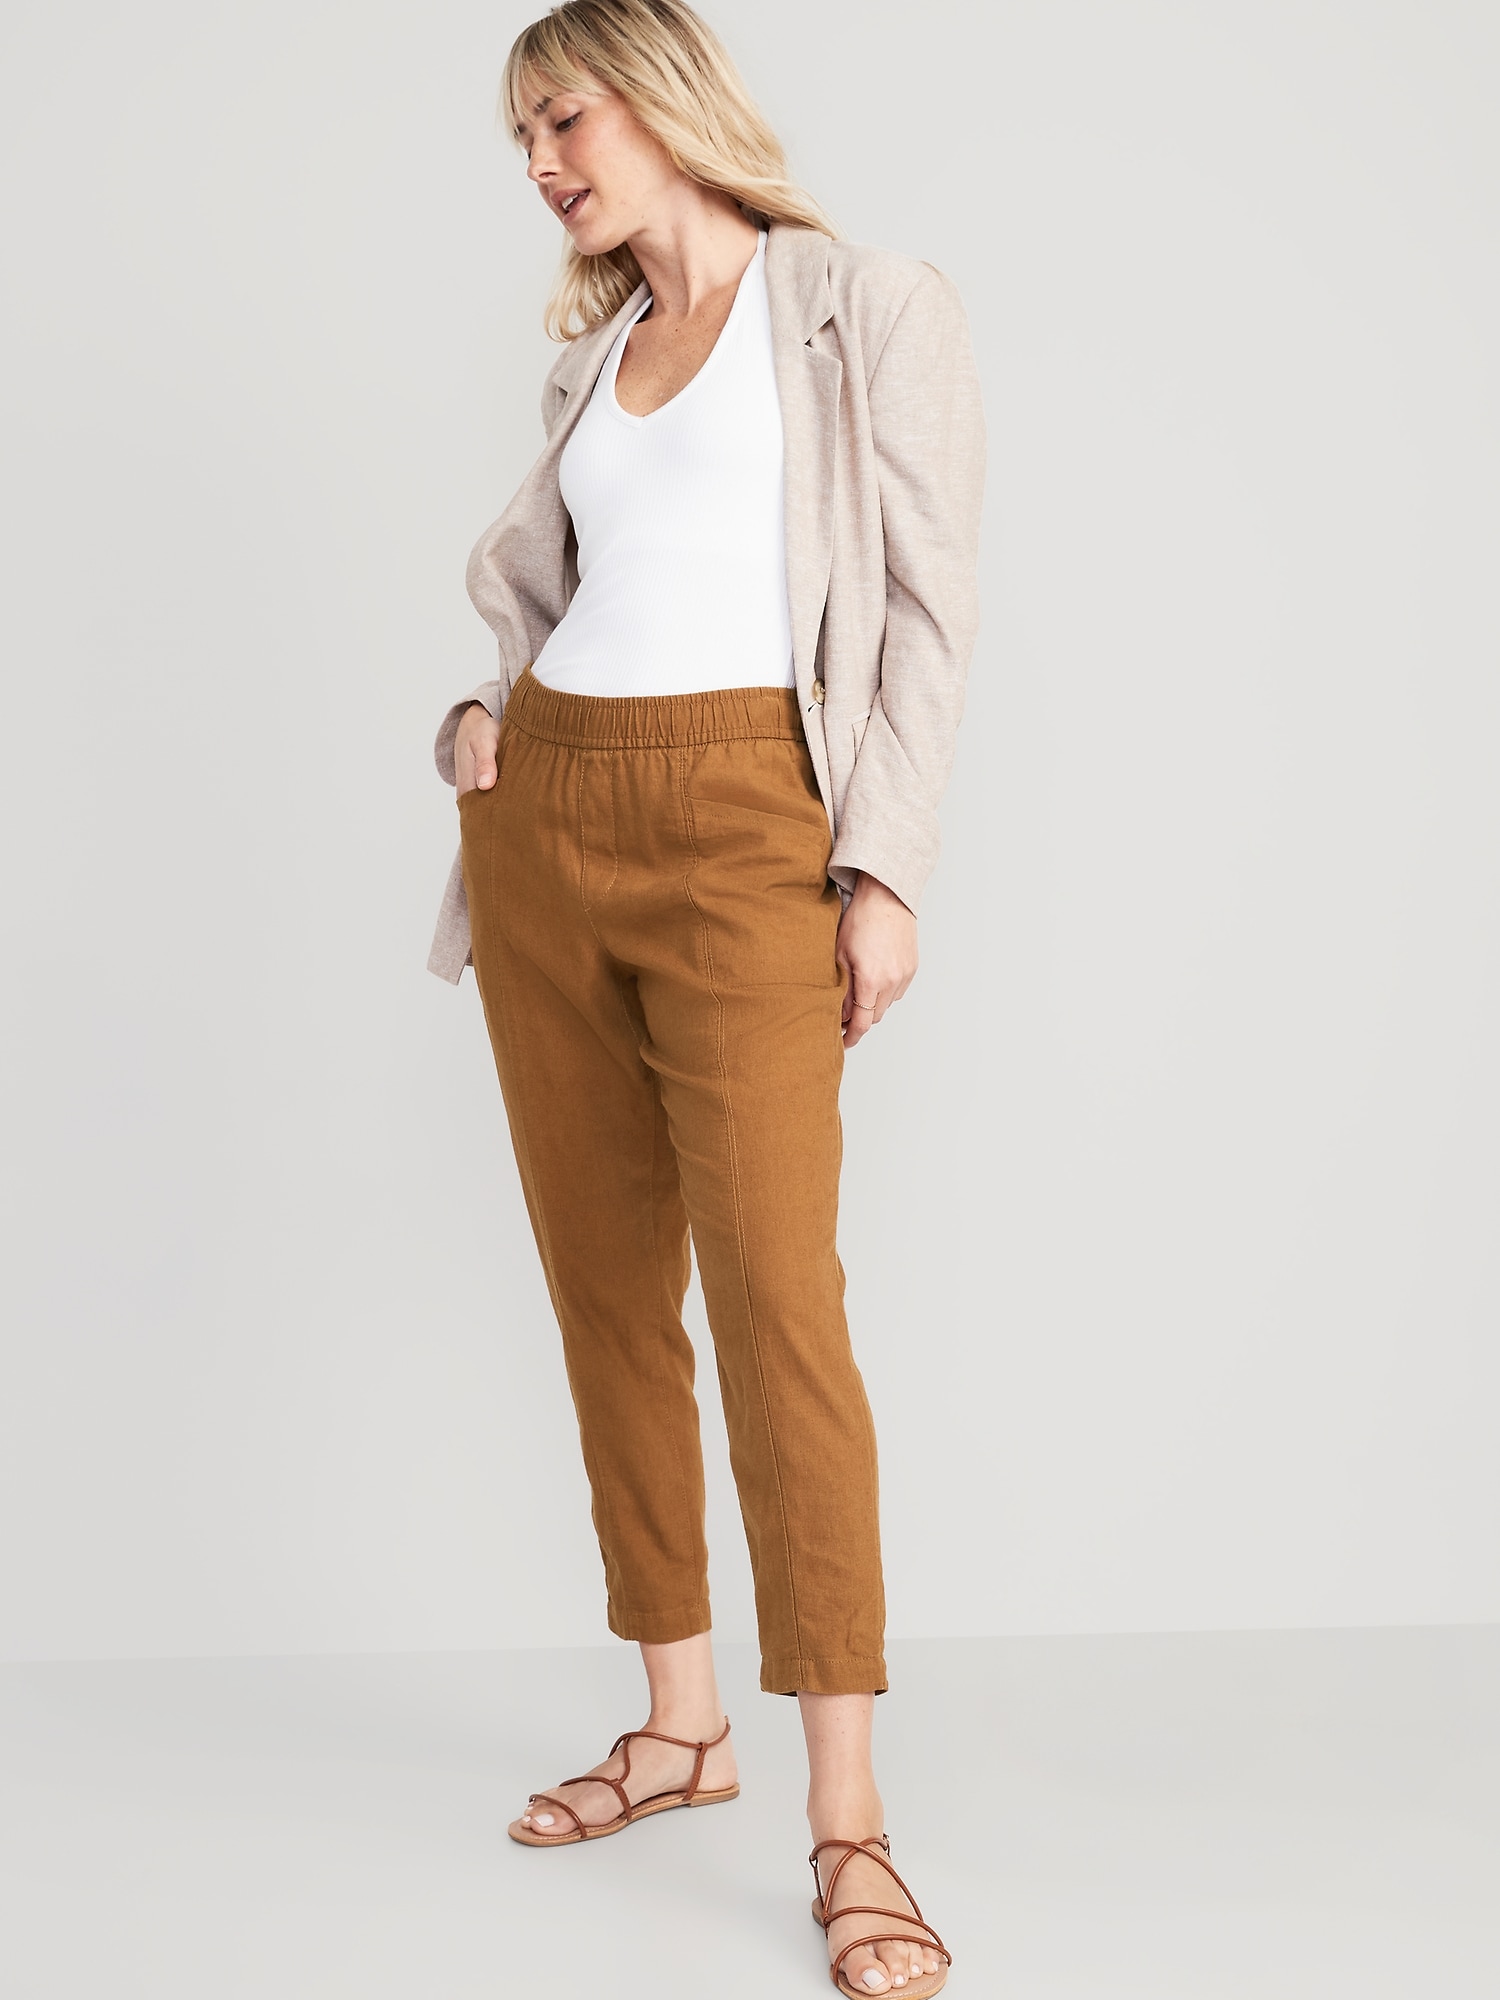 Share 50+ linen blend tapered trousers latest - in.coedo.com.vn